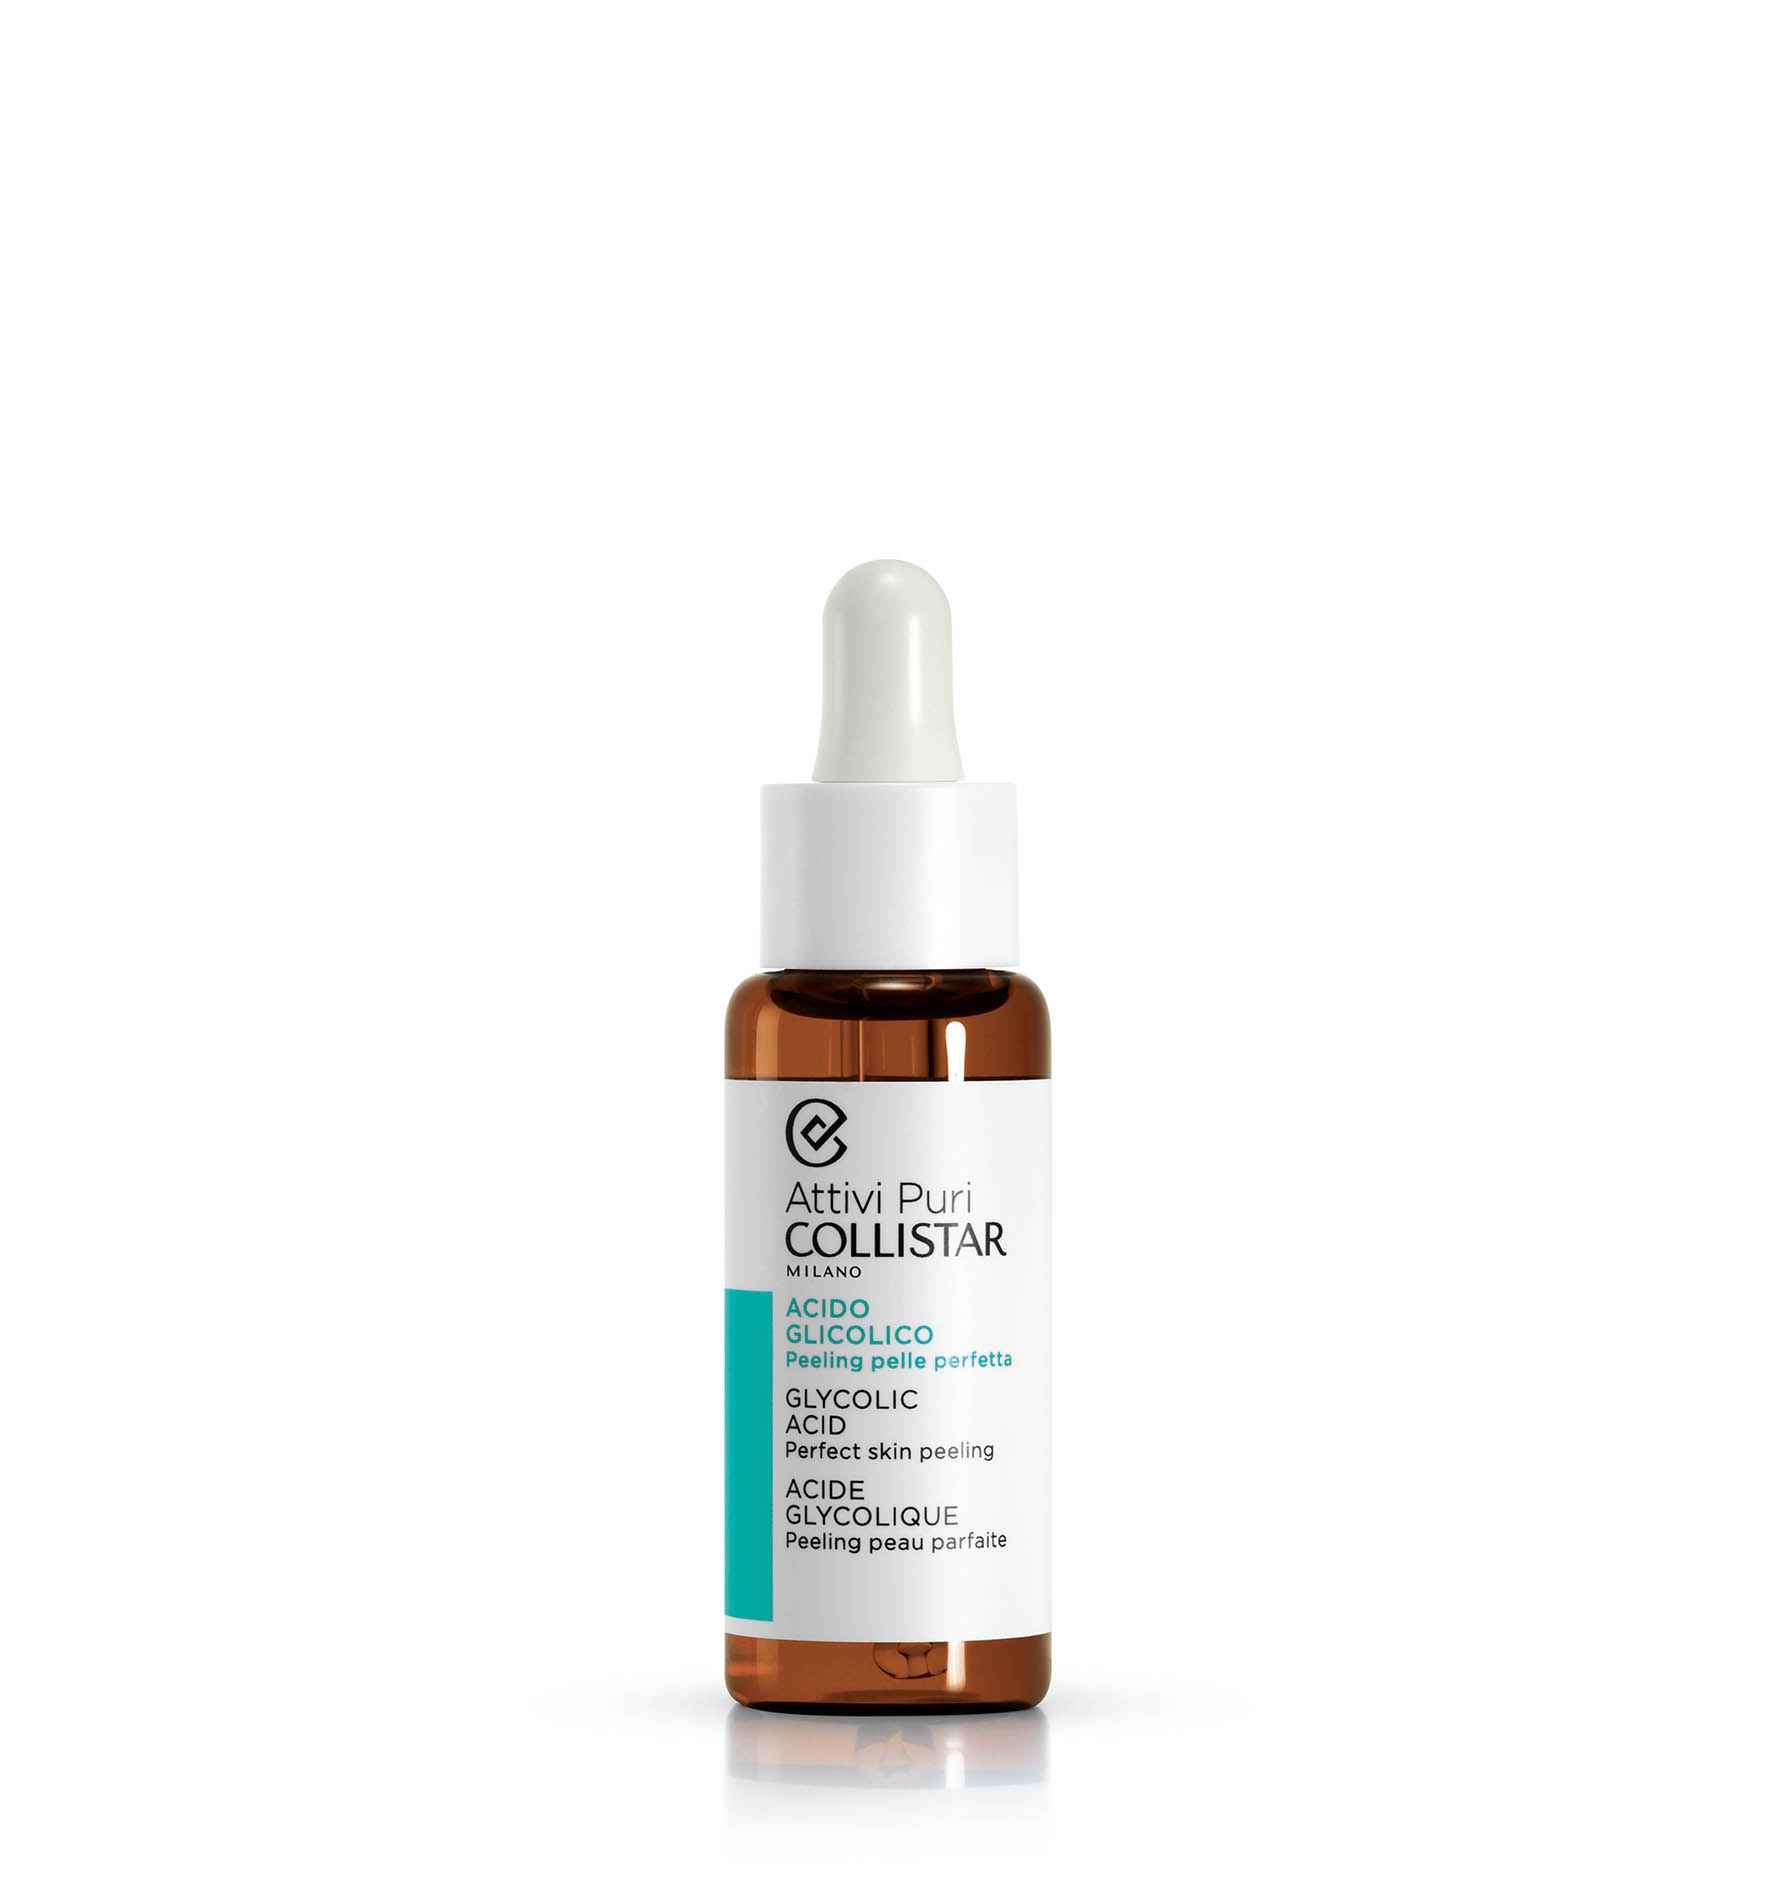 GLYCOLIC ACID - Dull skin and discolouration | Collistar - Shop Online Ufficiale